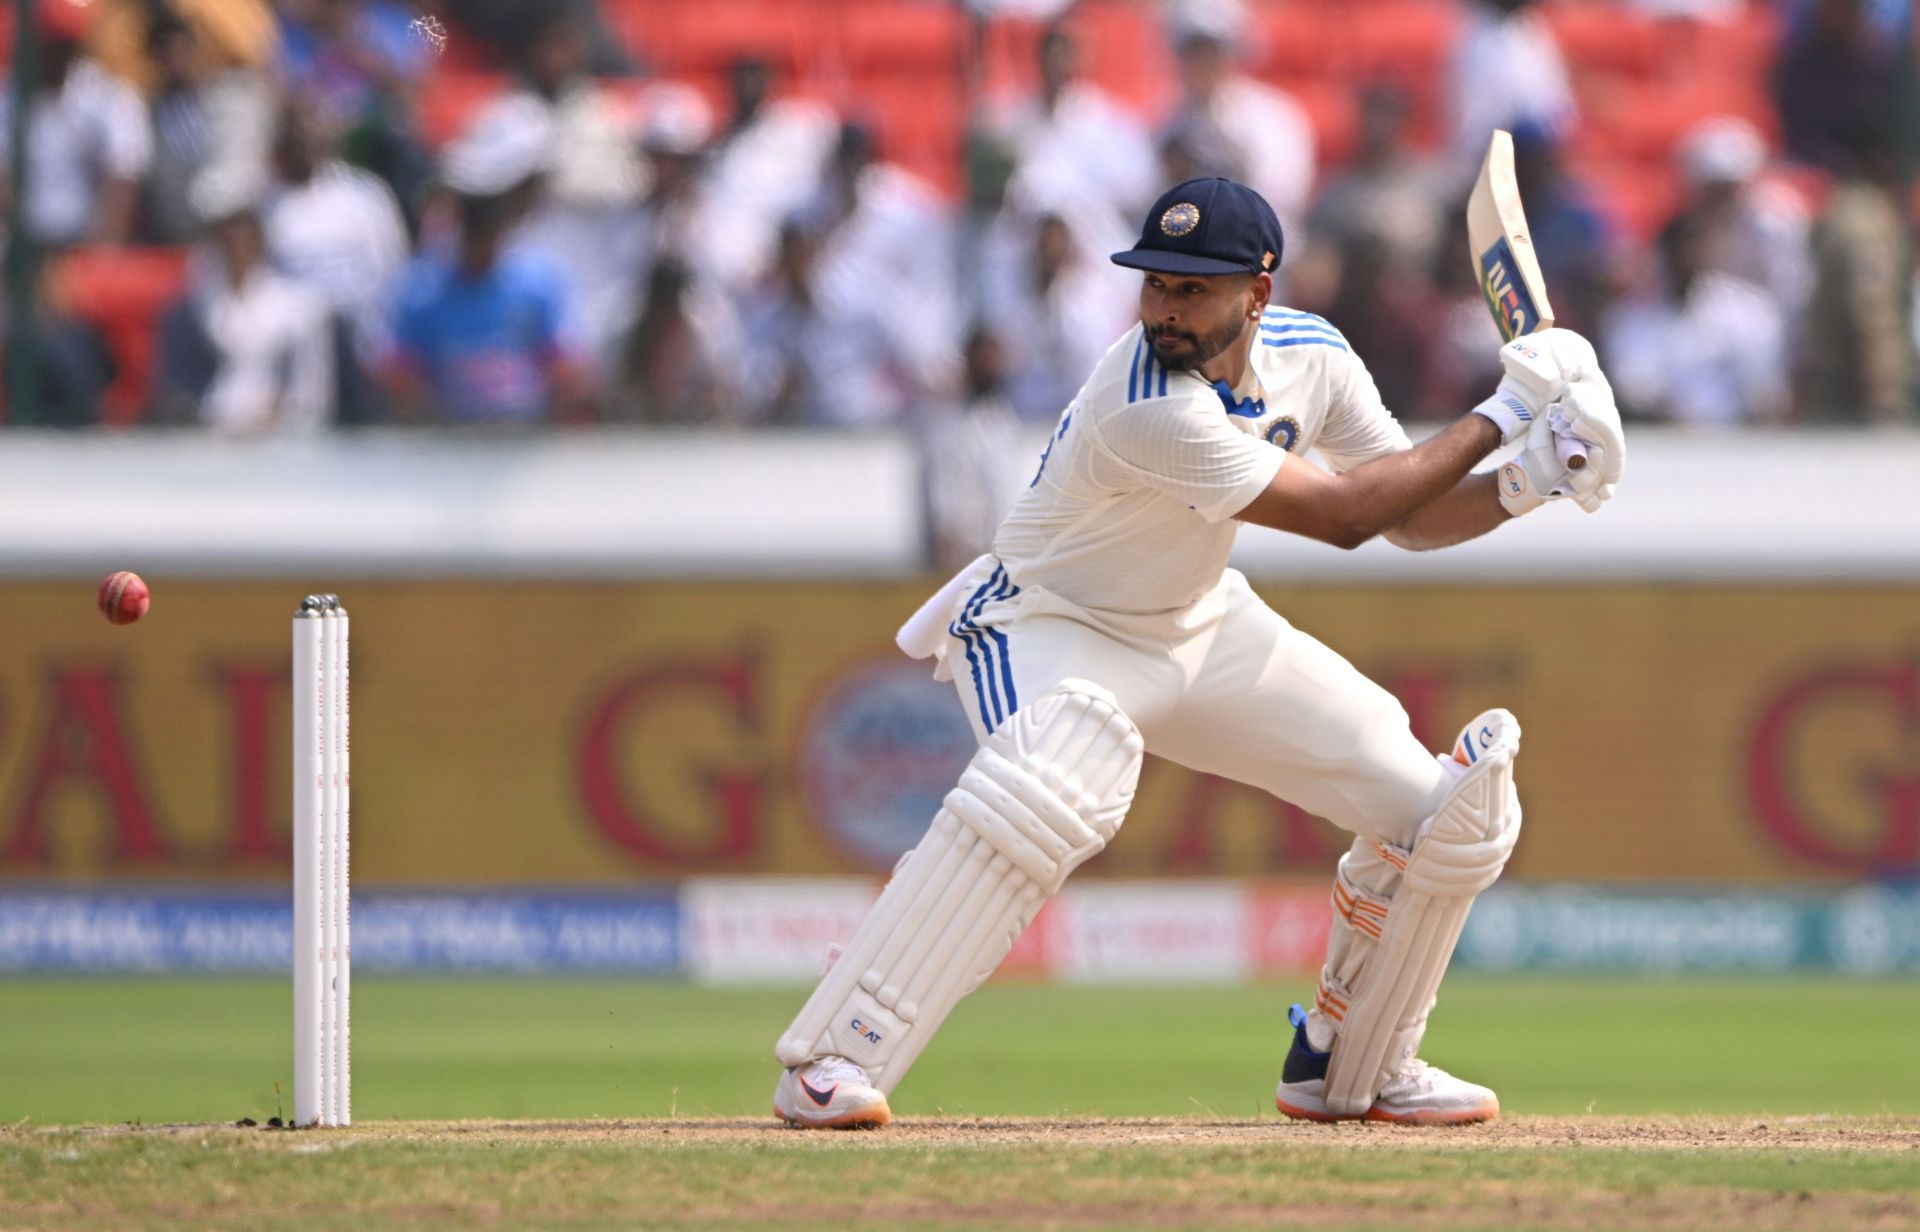 Shreyas Iyer has been short of runs in Test cricket. (Pic: Getty Images)